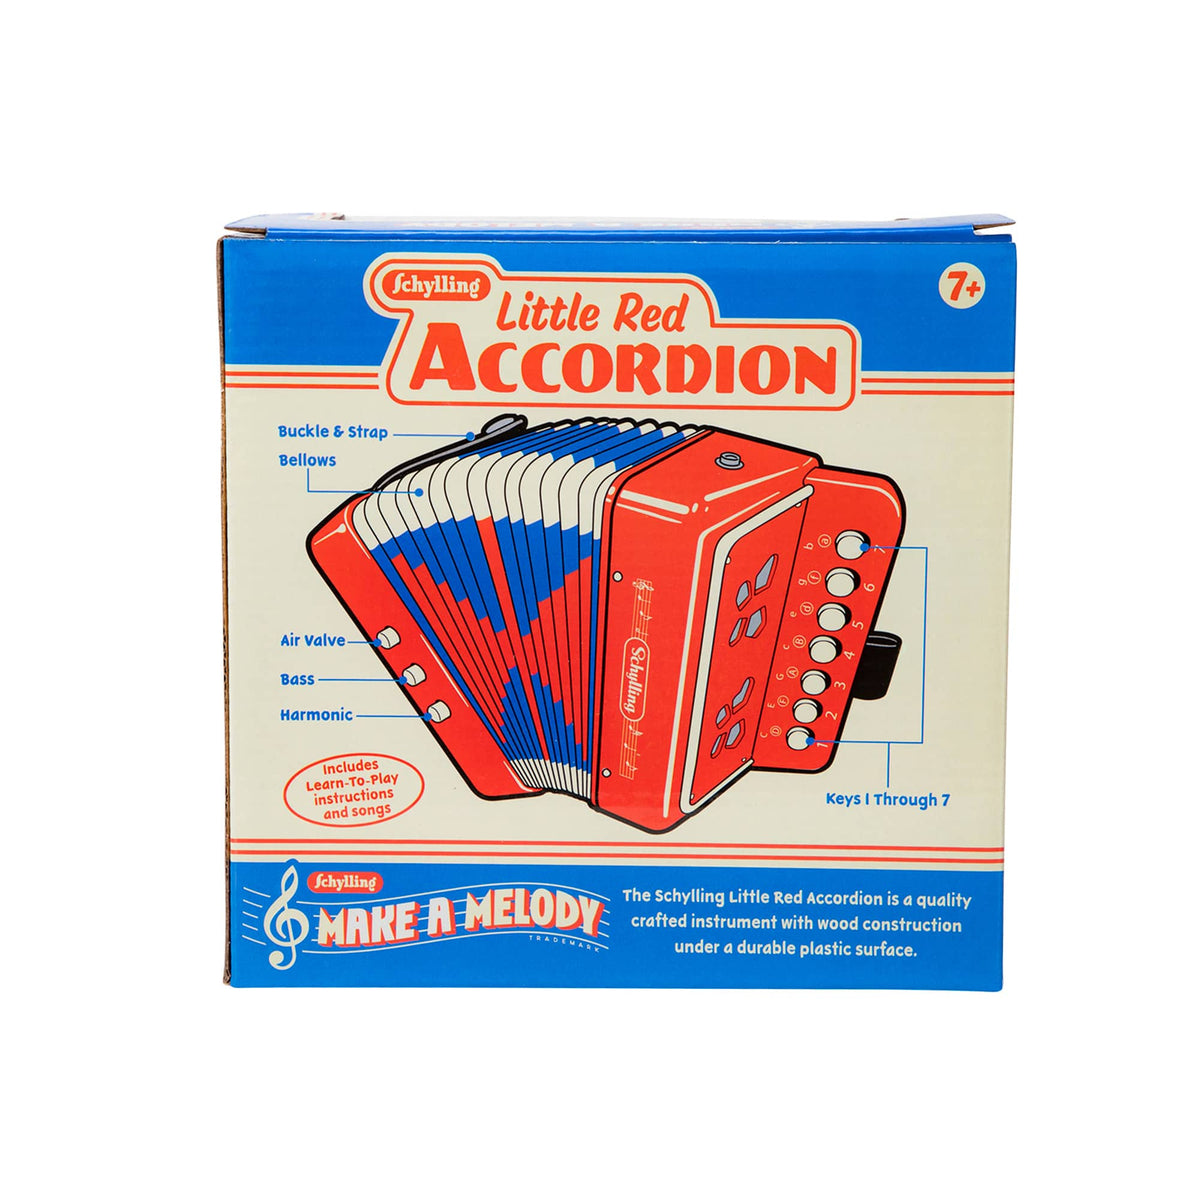 Rear view of the accordion in its box.